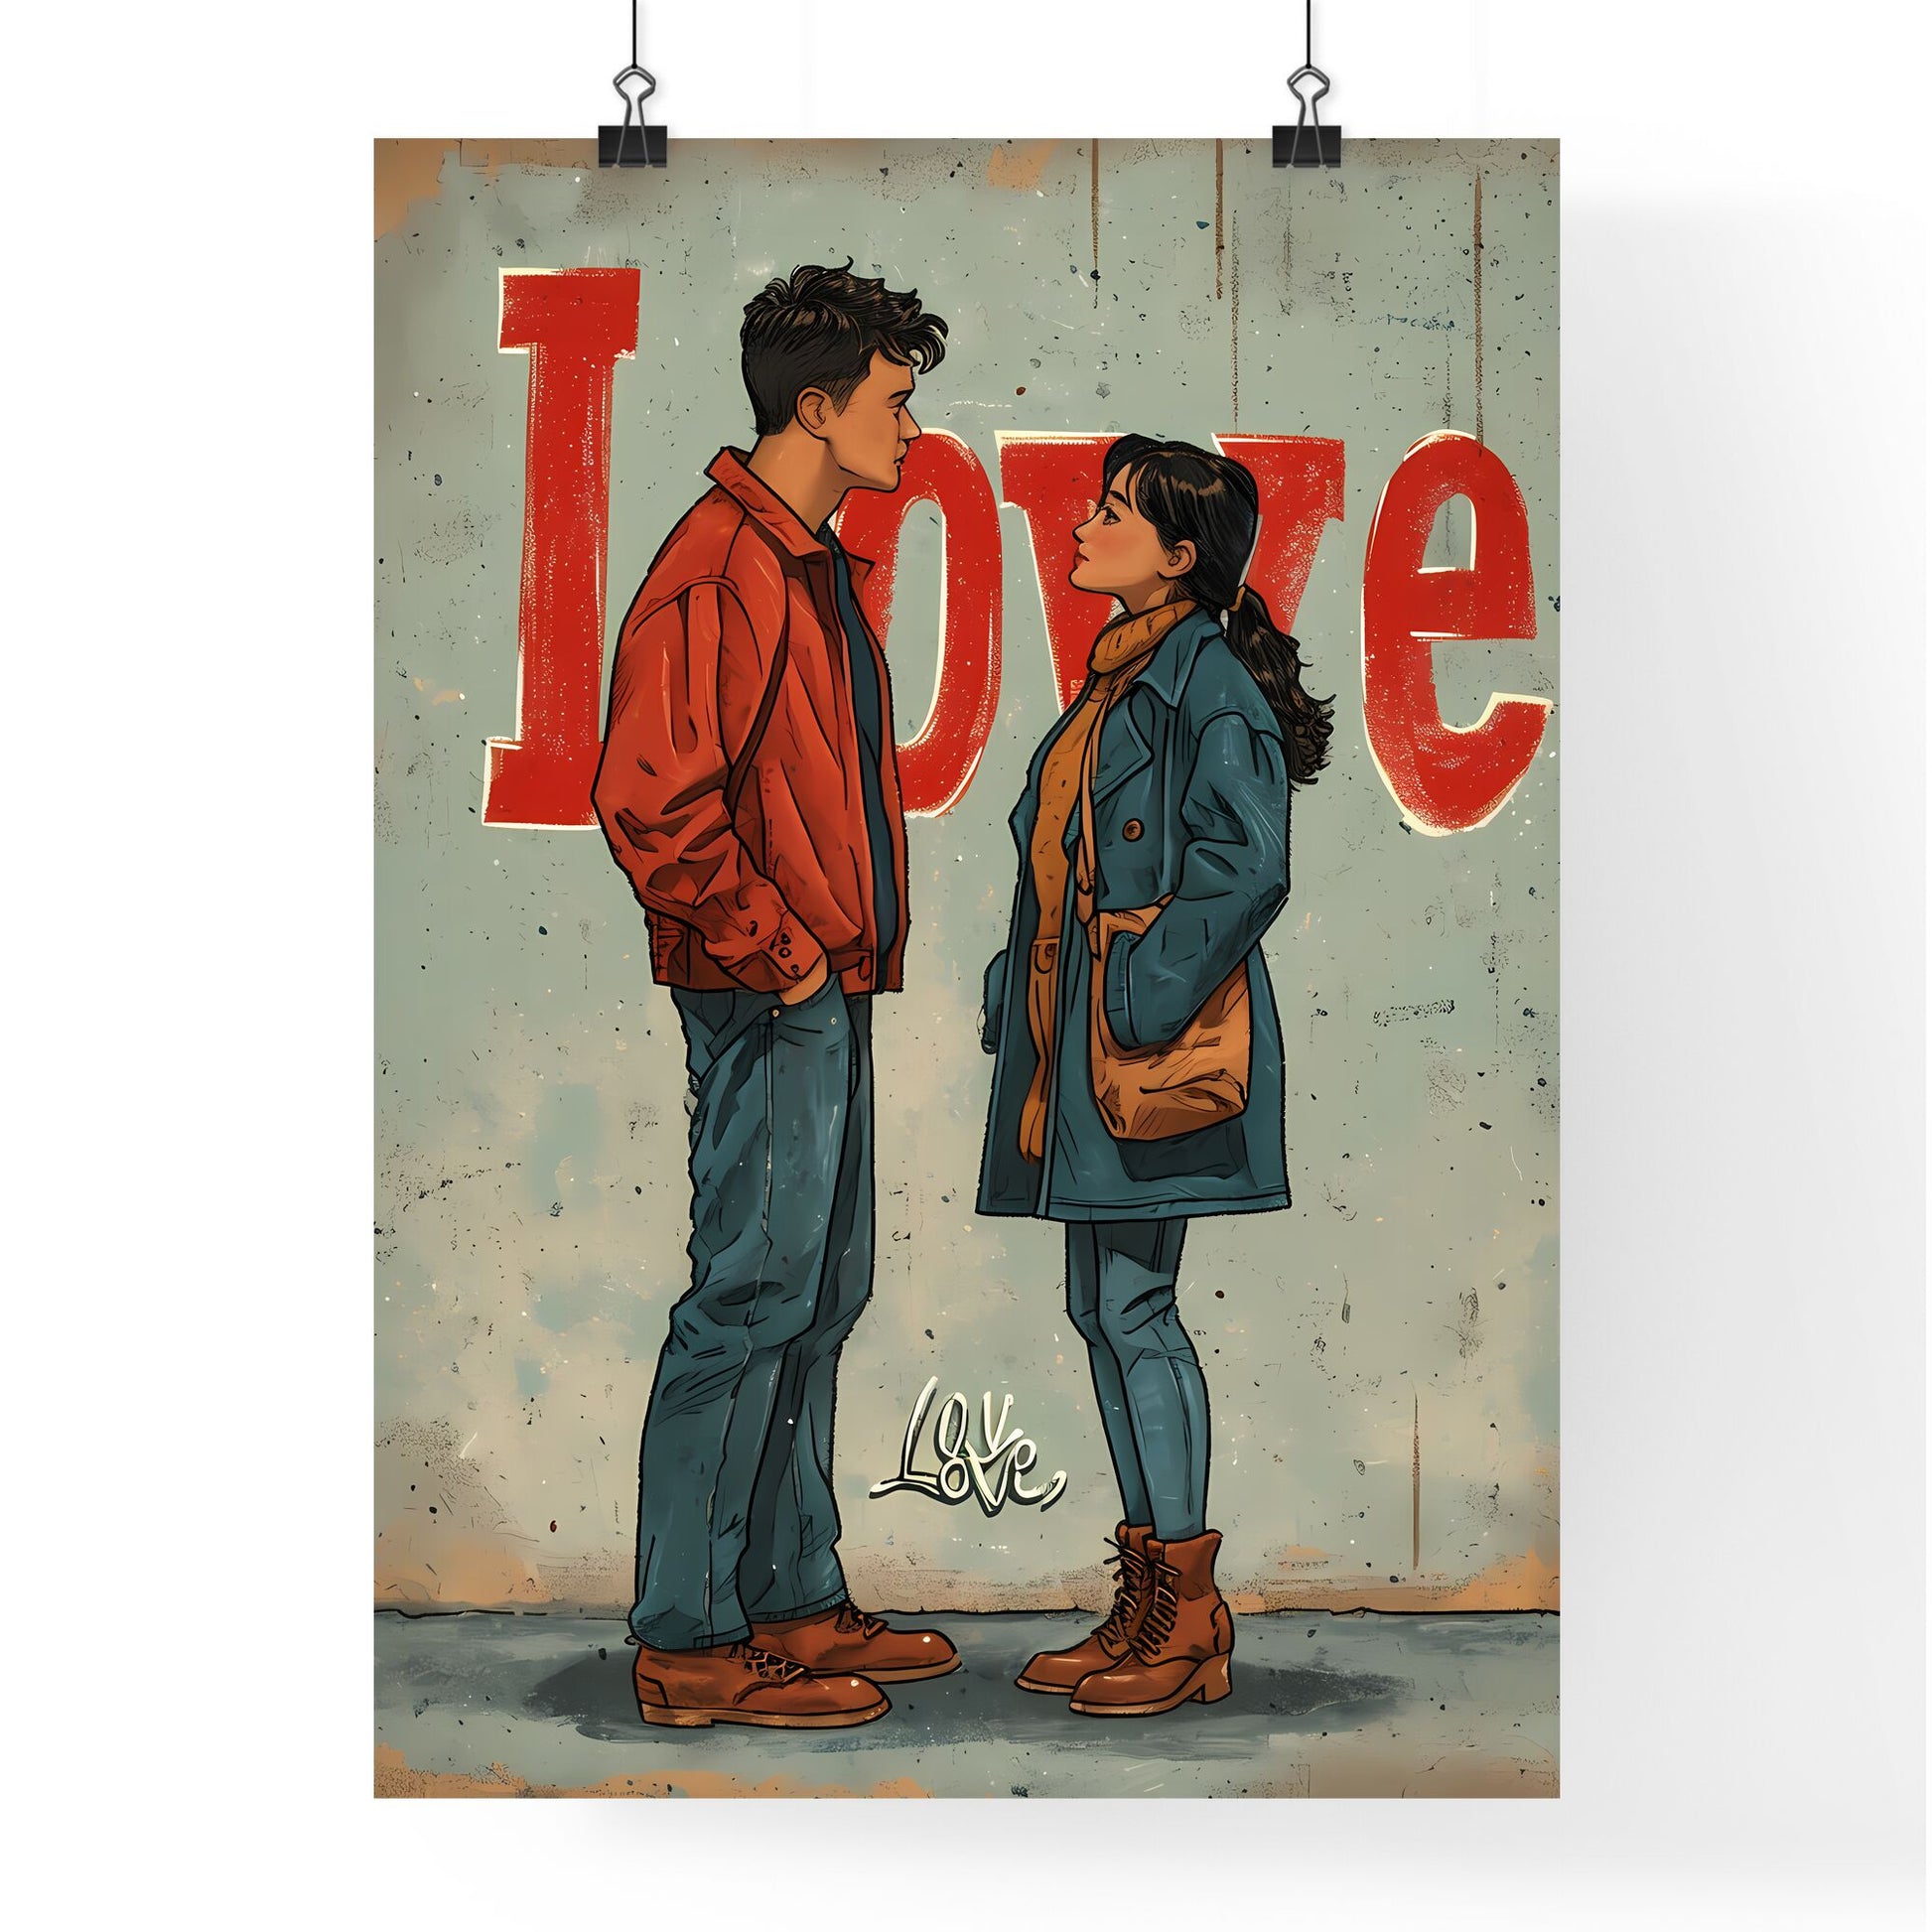 Cute pastel Love illustration - Art print of a man and woman standing in front of a sign Default Title